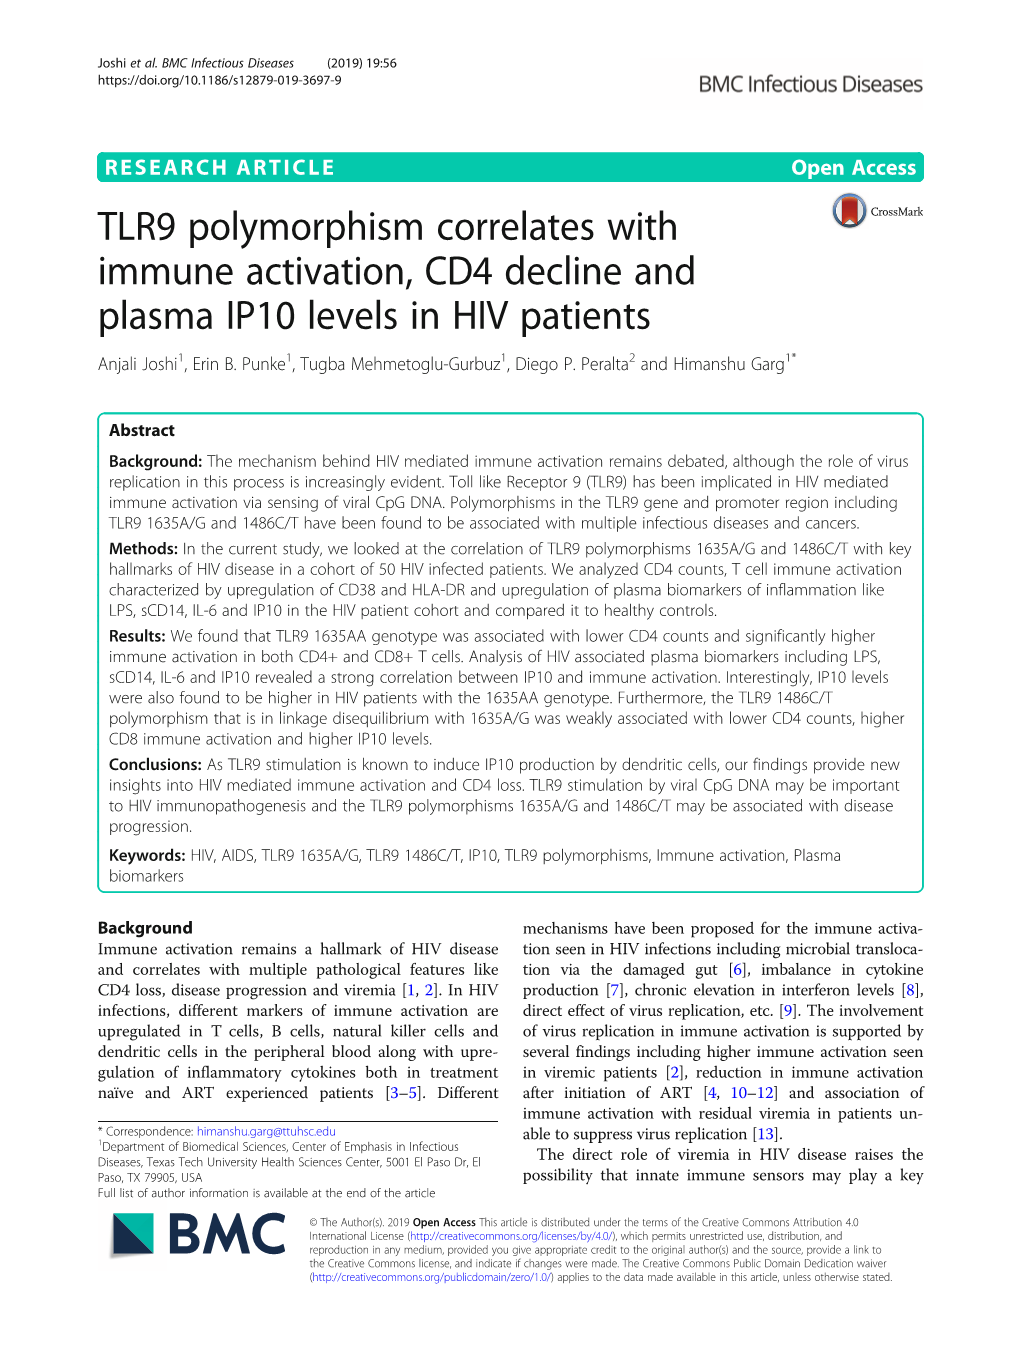 TLR9 Polymorphism Correlates with Immune Activation, CD4 Decline and Plasma IP10 Levels in HIV Patients Anjali Joshi1, Erin B